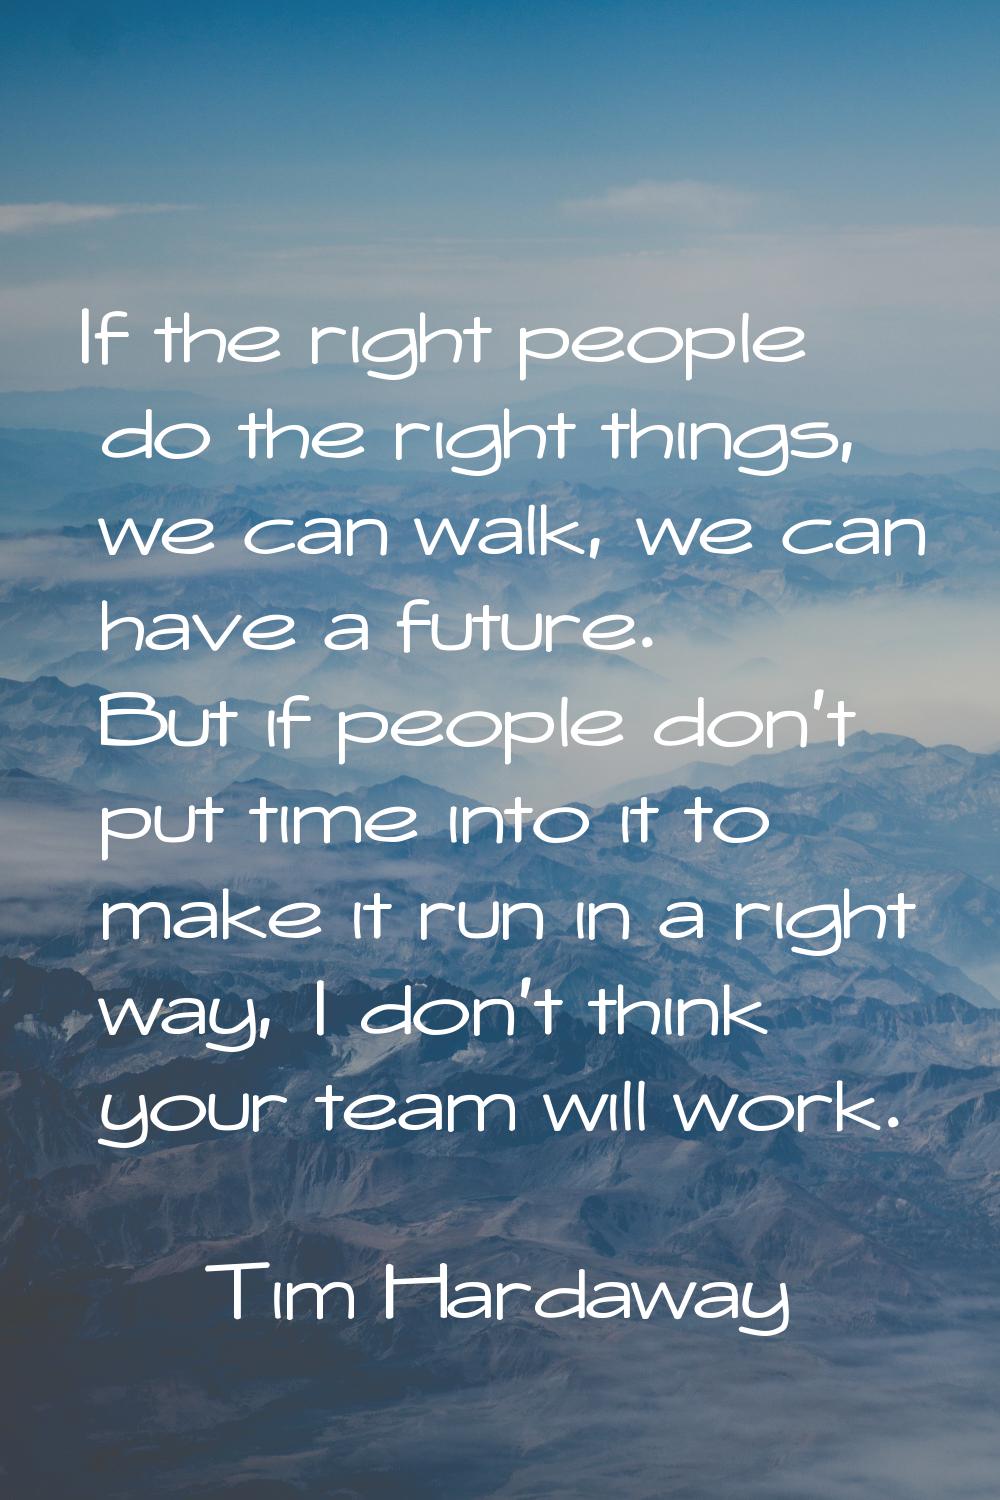 If the right people do the right things, we can walk, we can have a future. But if people don't put